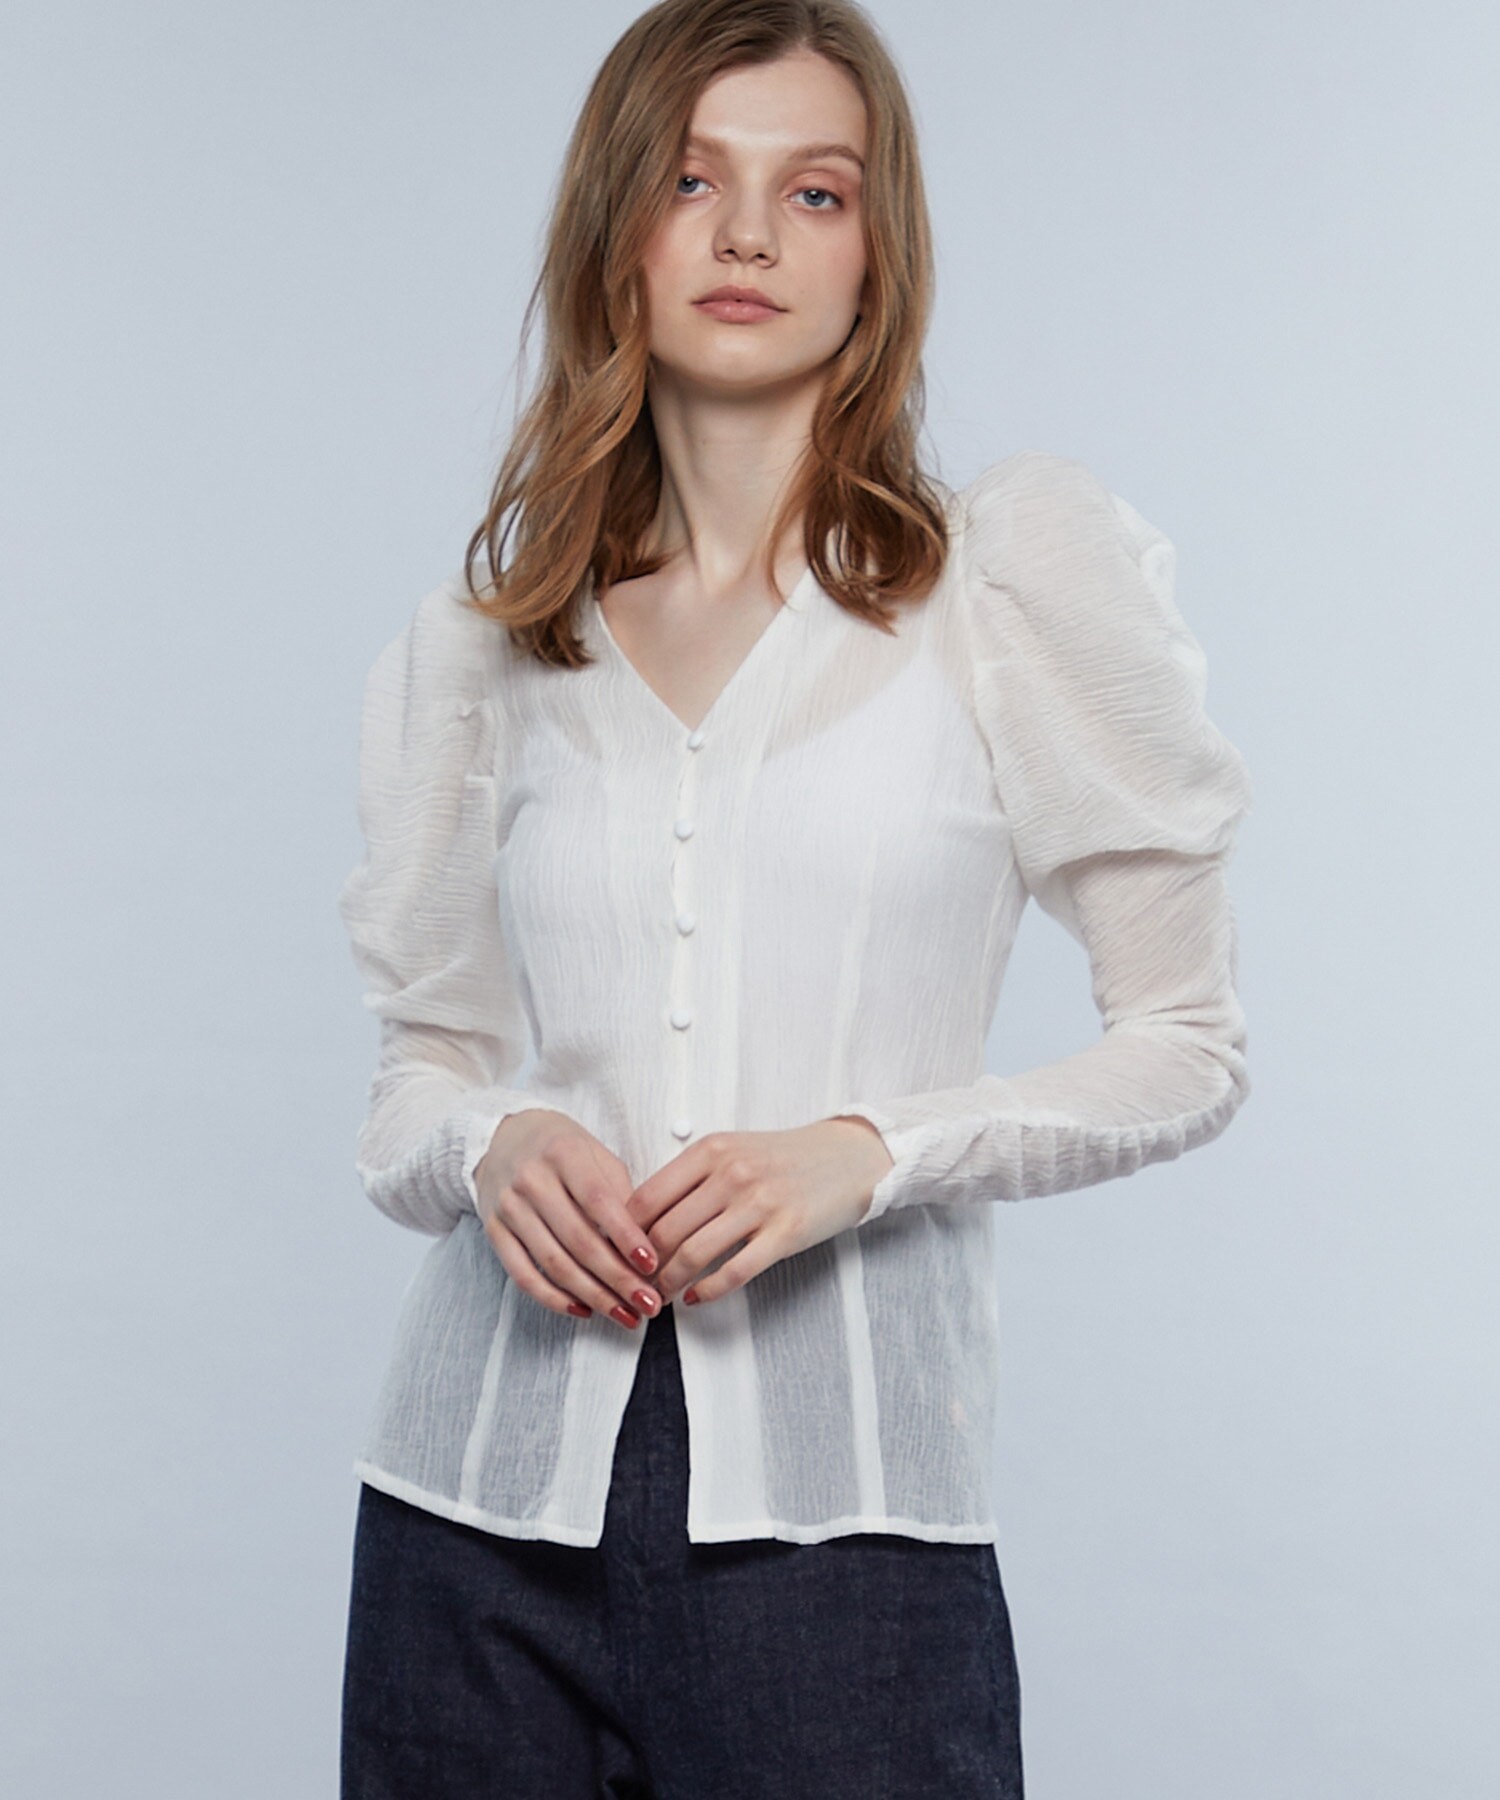 WOMENS/TOPS/SHIRTS&BLOUSE｜ STUDIOUS ONLINE公式通販サイト